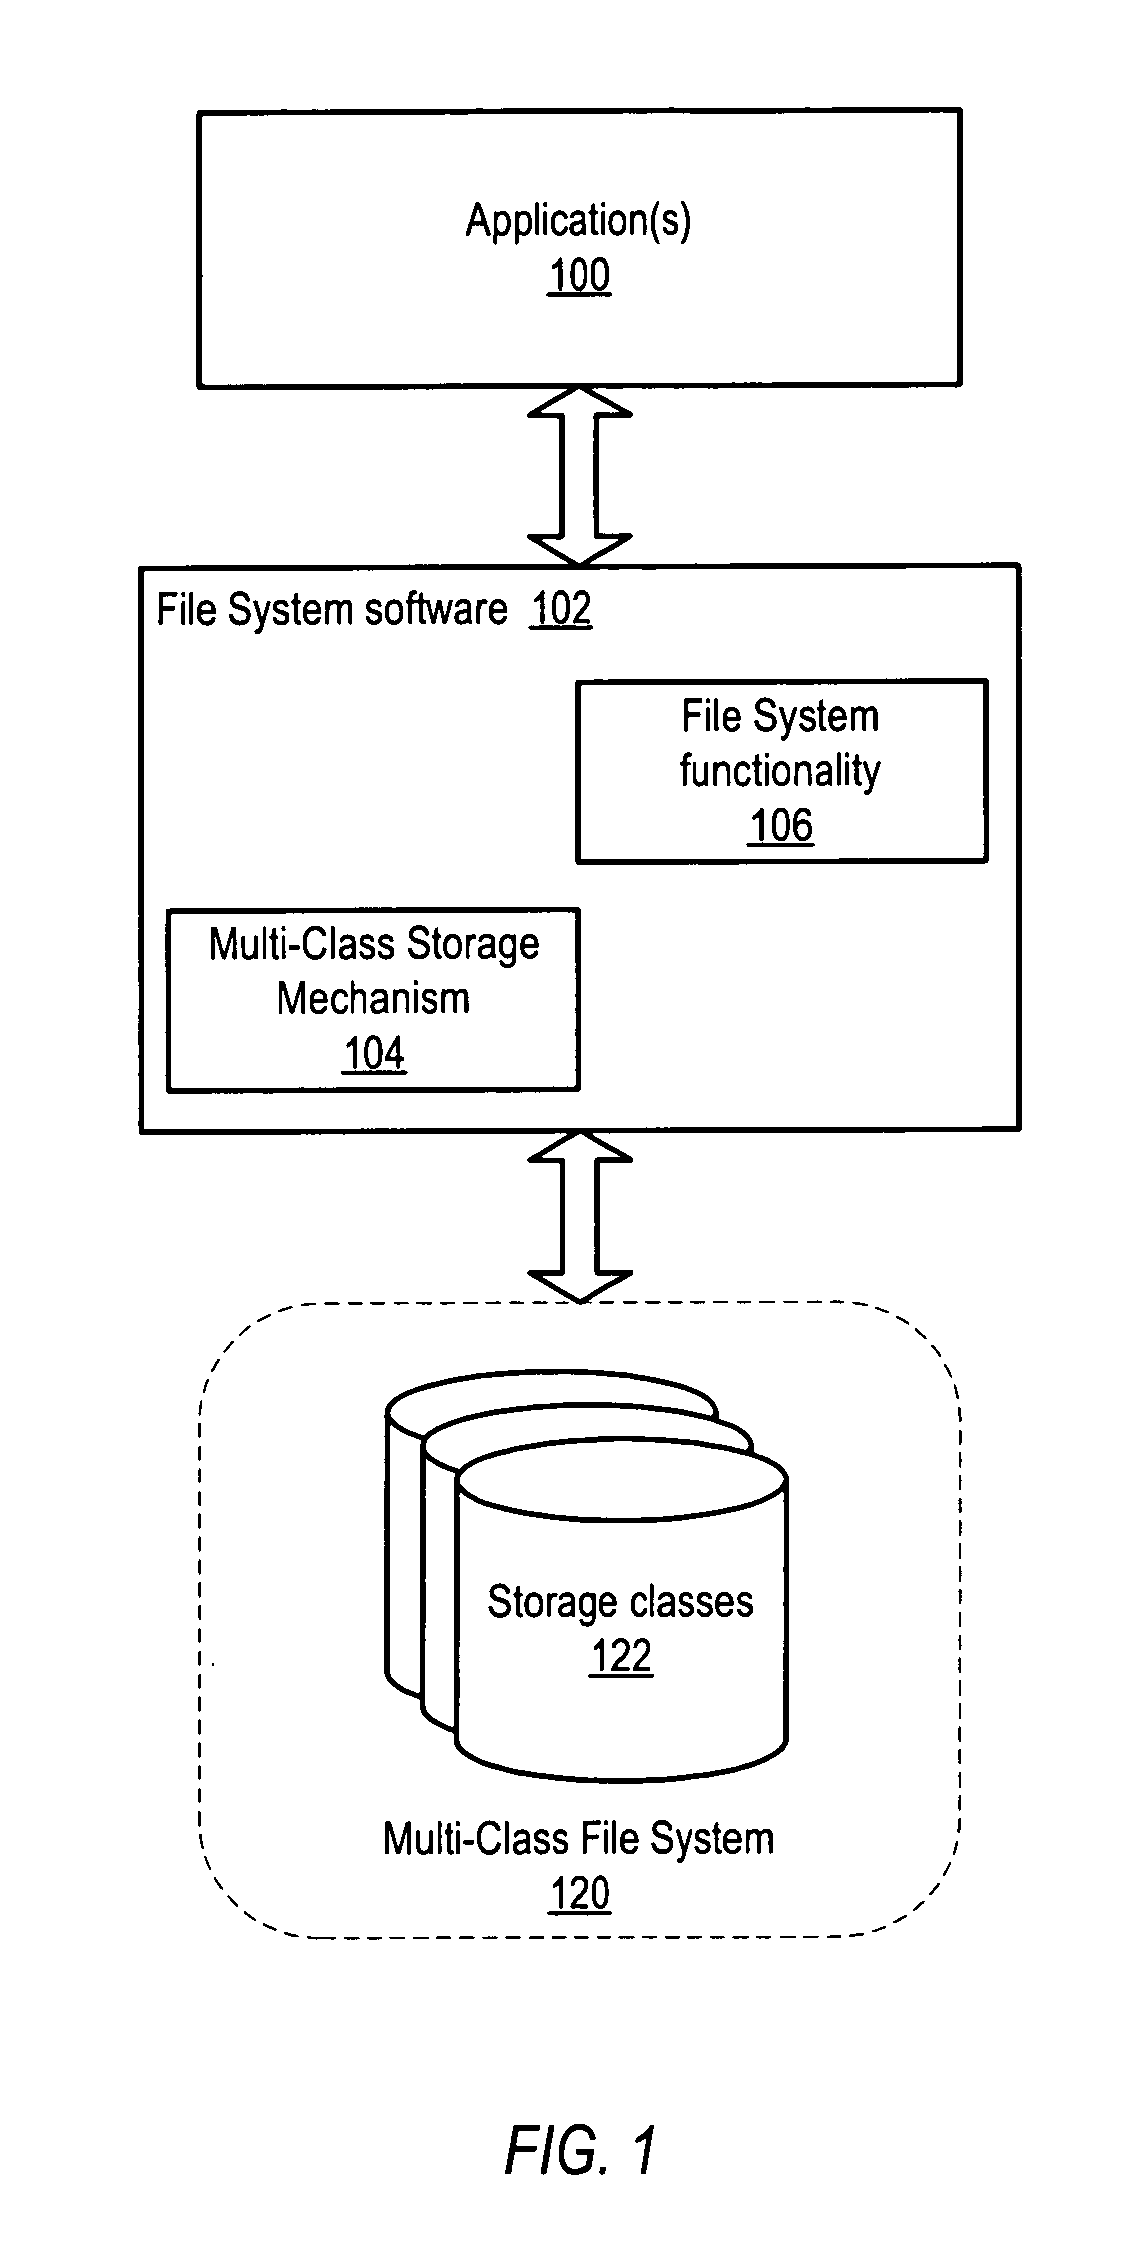 Backup mechanism for a multi-class file system